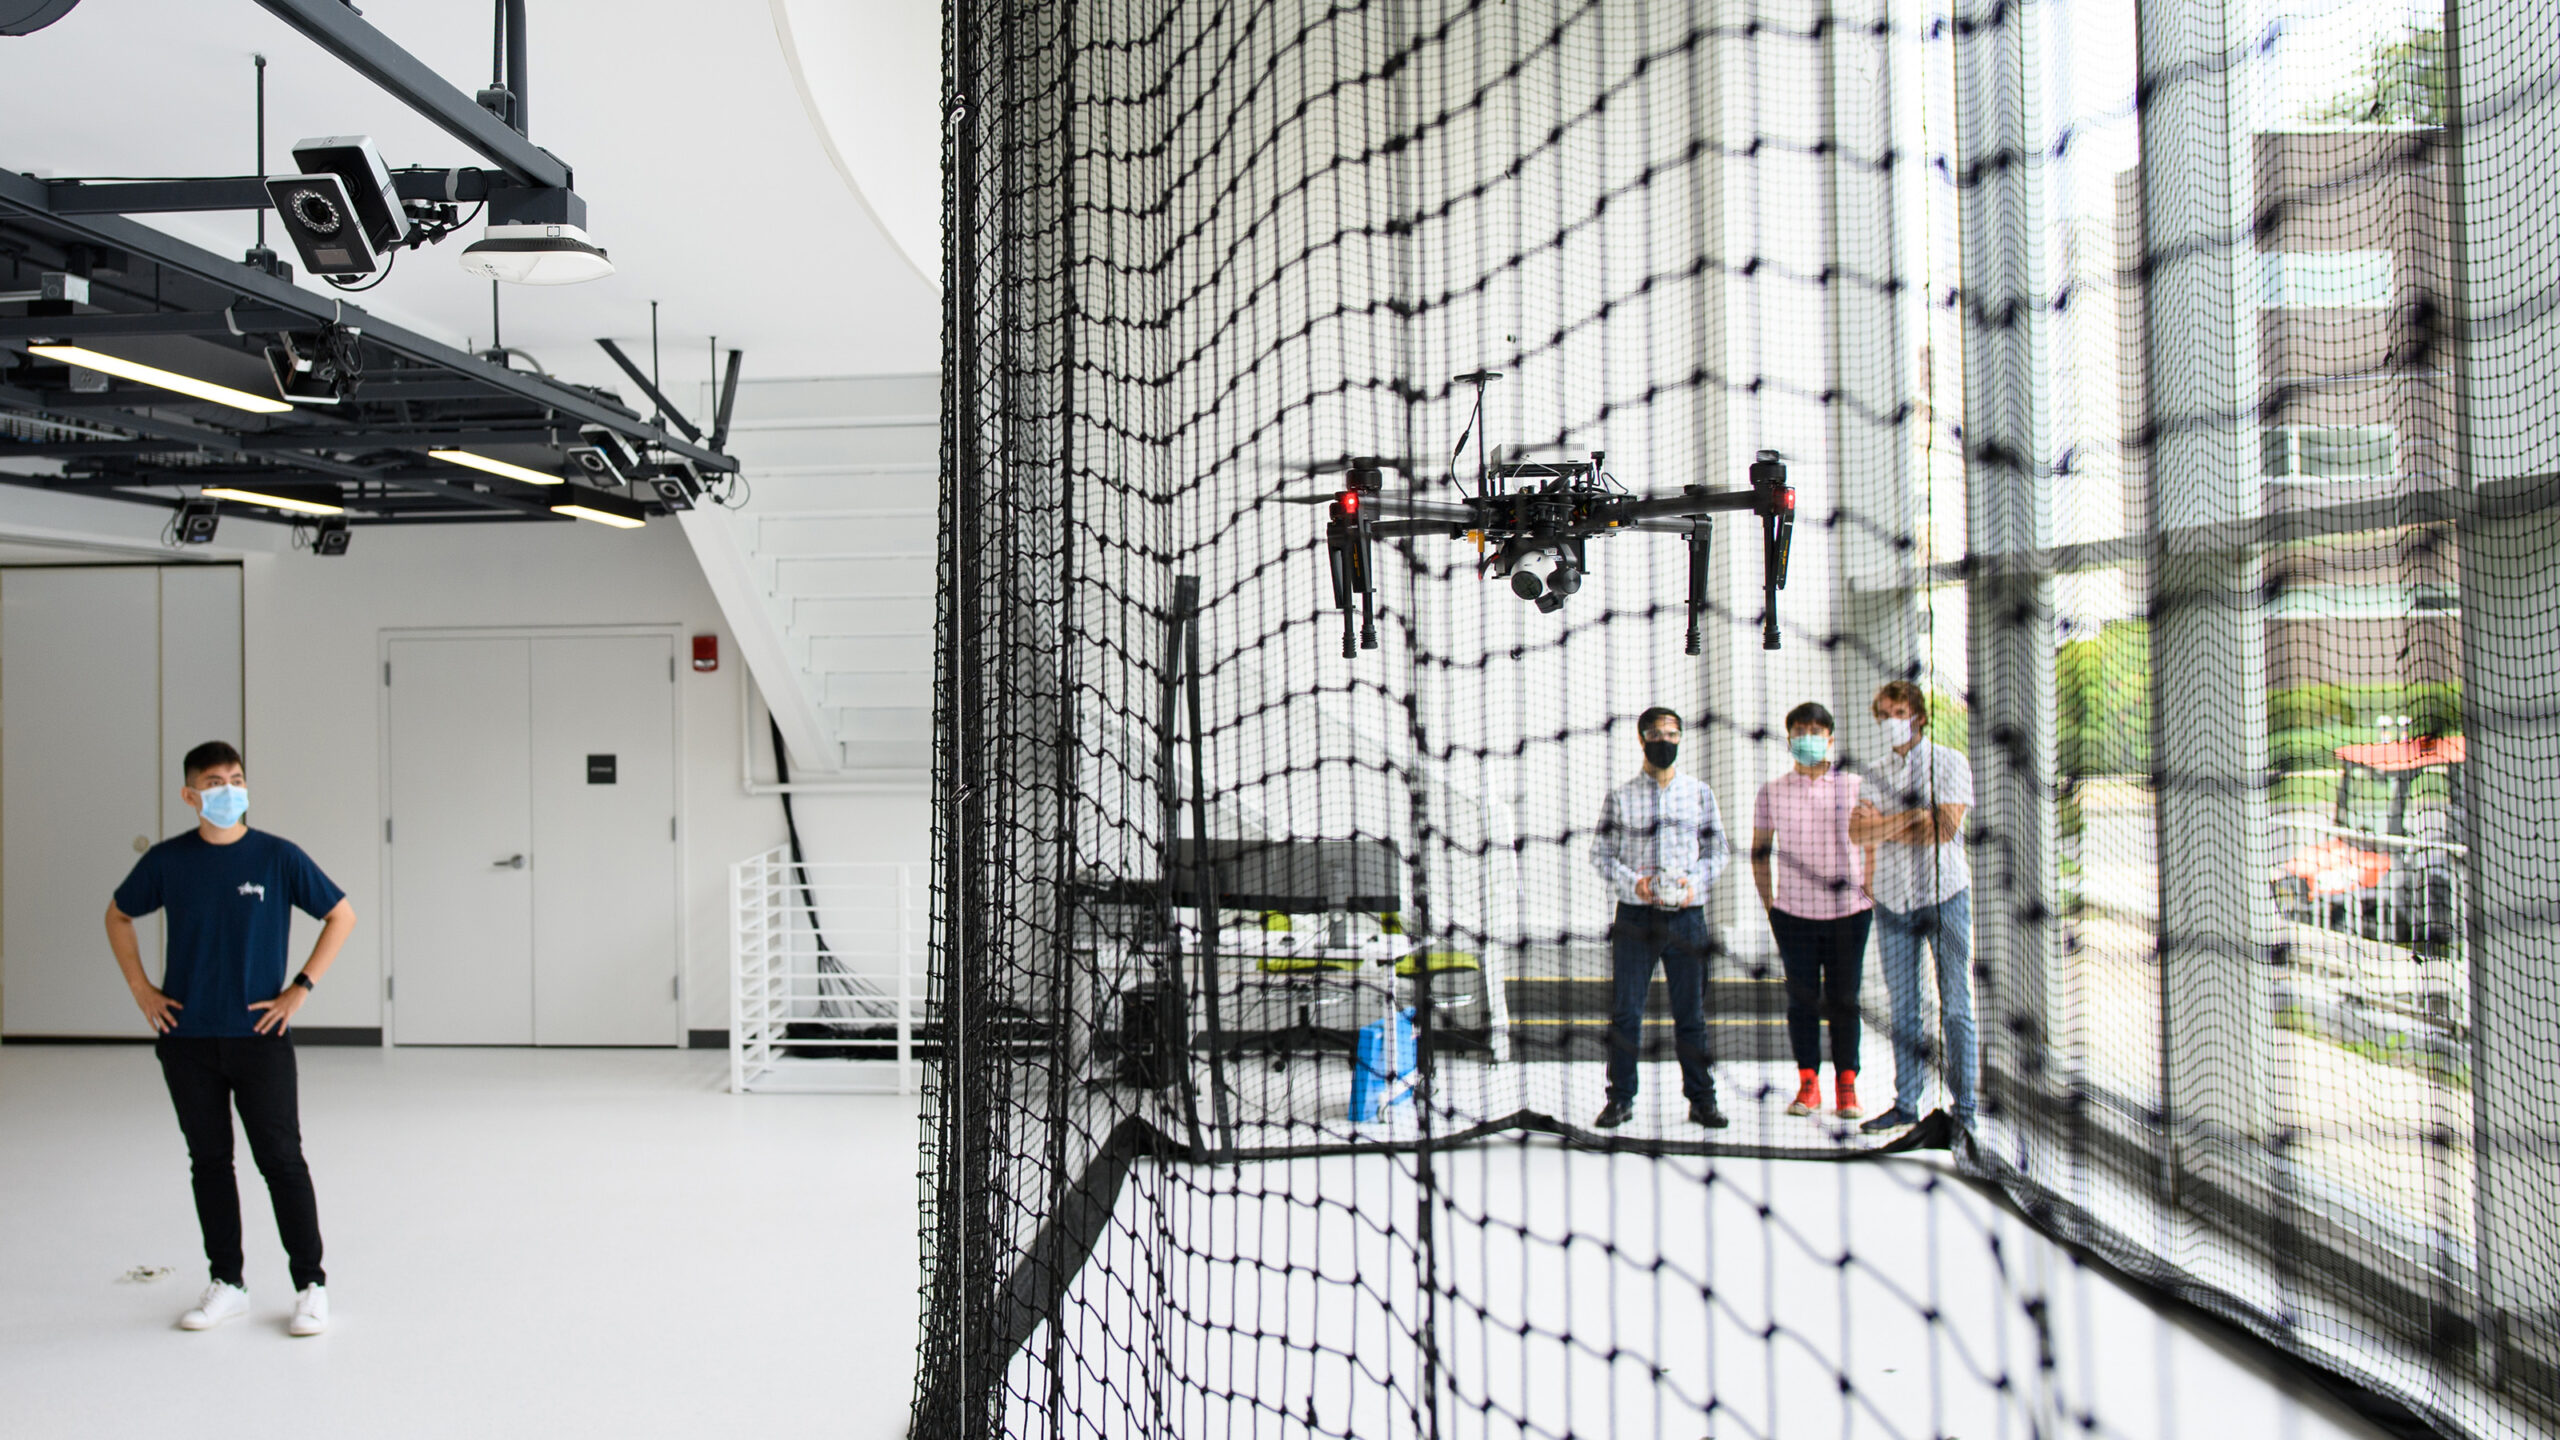 People fly a drone indoors behind a mesh wall